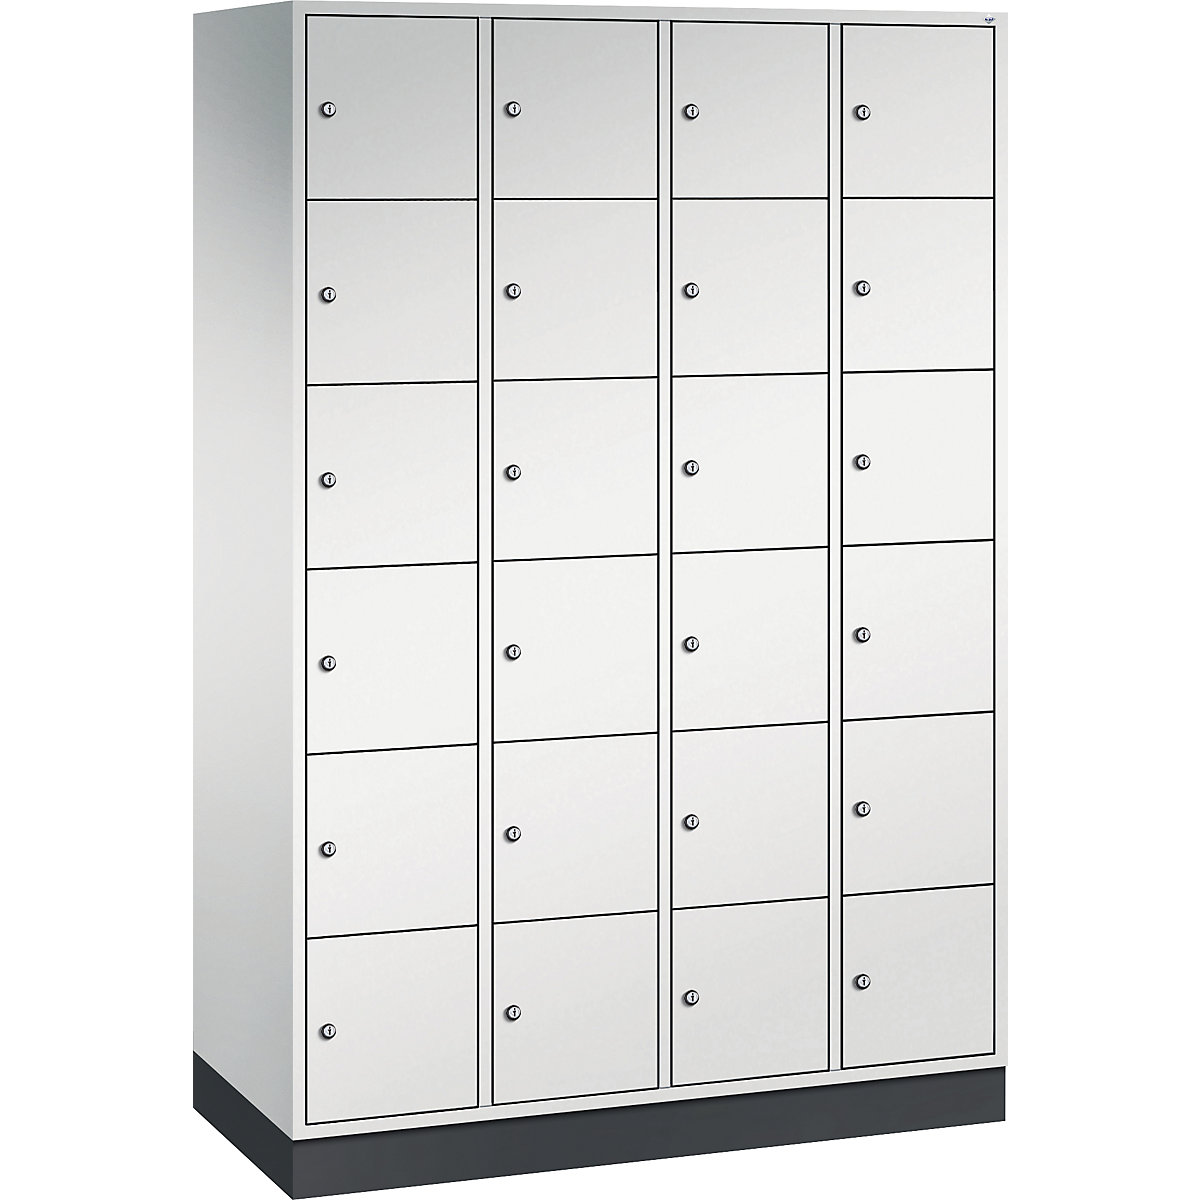 INTRO steel compartment locker, compartment height 285 mm – C+P, WxD 1220 x 500 mm, 24 compartments, light grey body, light grey doors-4